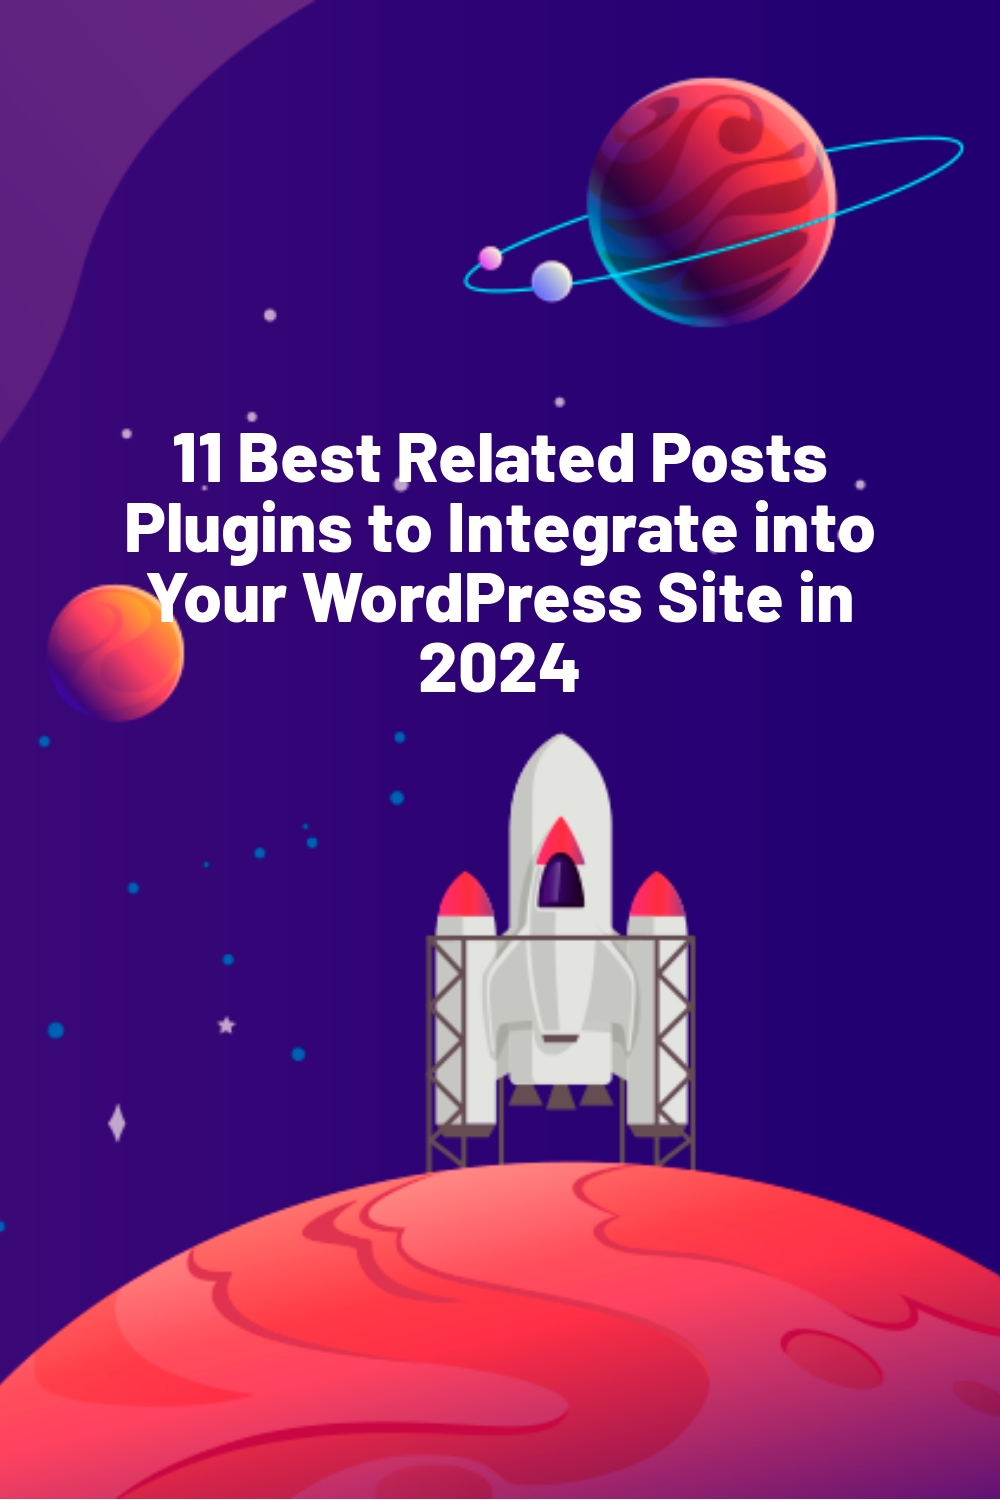 11 Best Related Posts Plugins to Integrate into Your WordPress Site in 2024